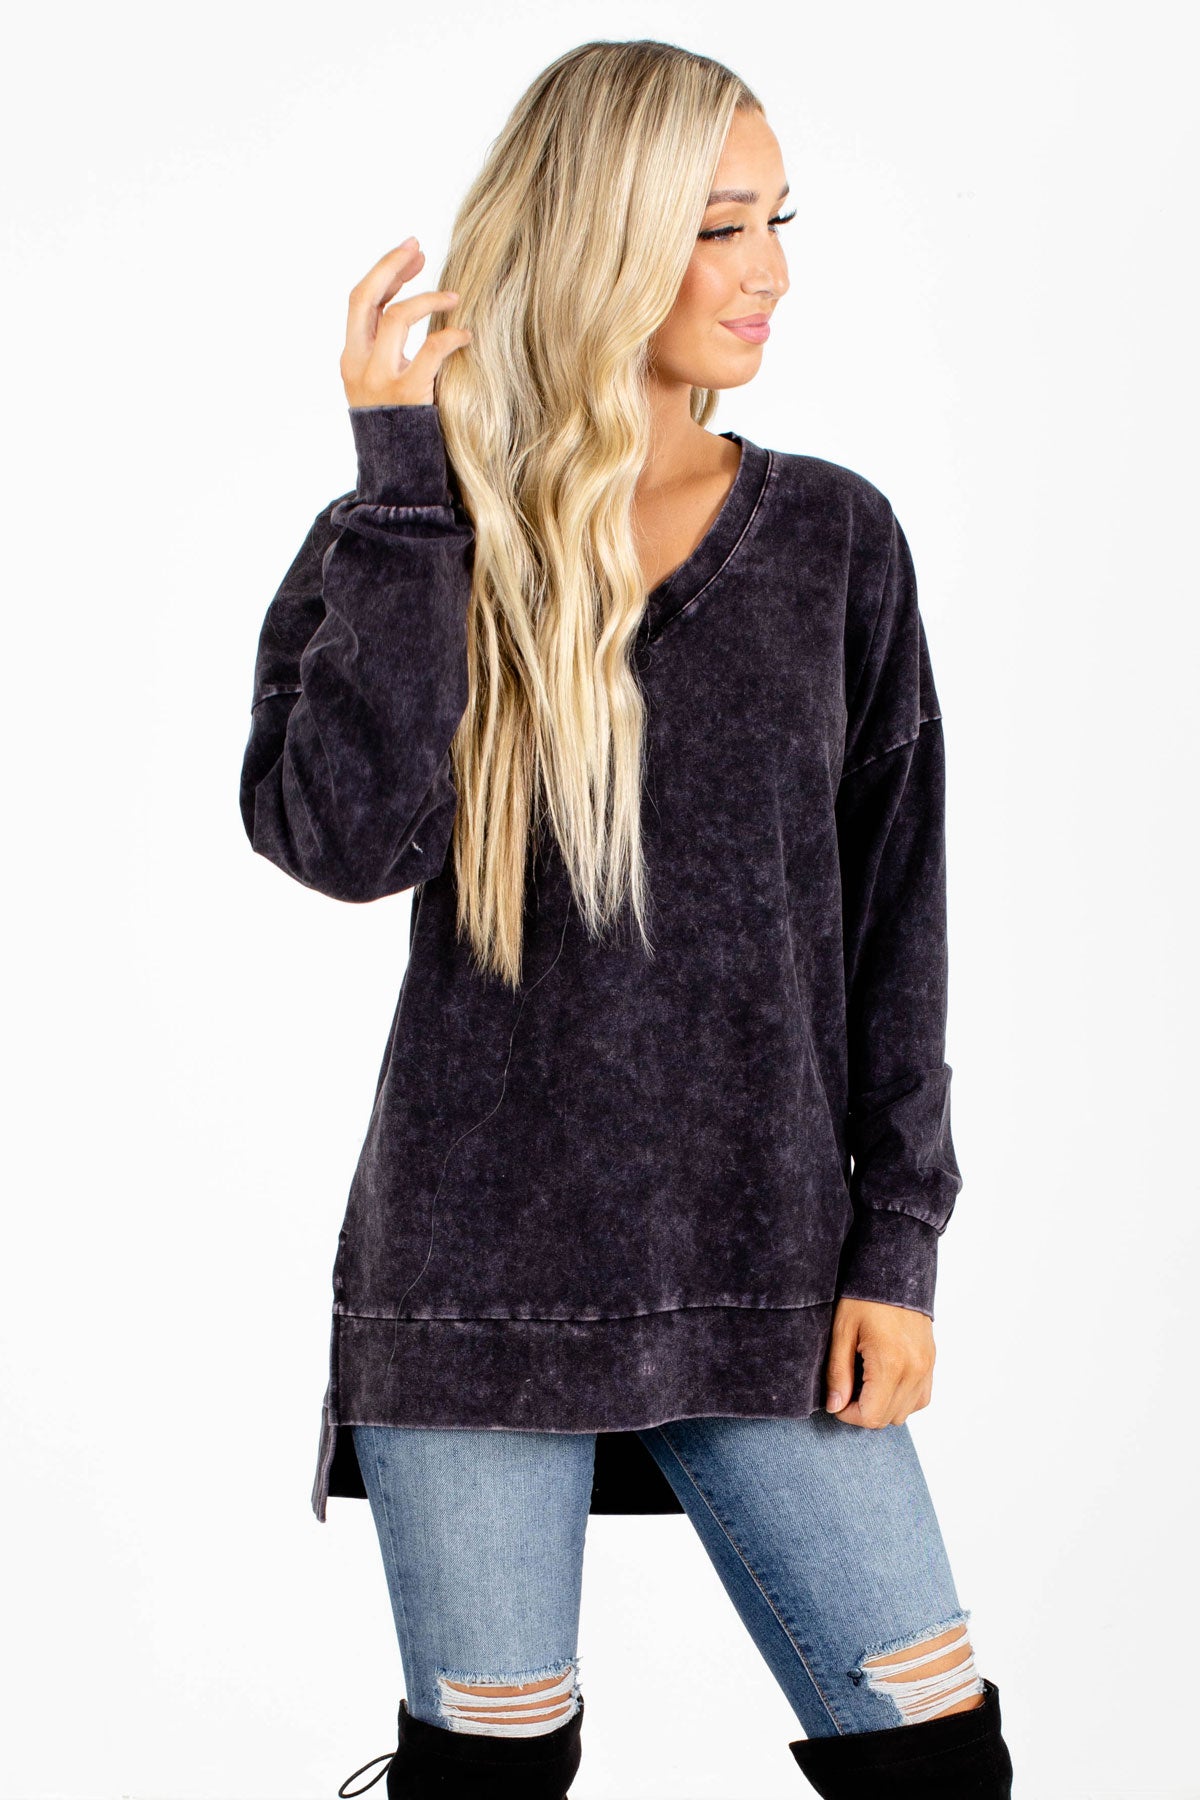 Gray Cute and Comfortable Boutique Pullovers for Women